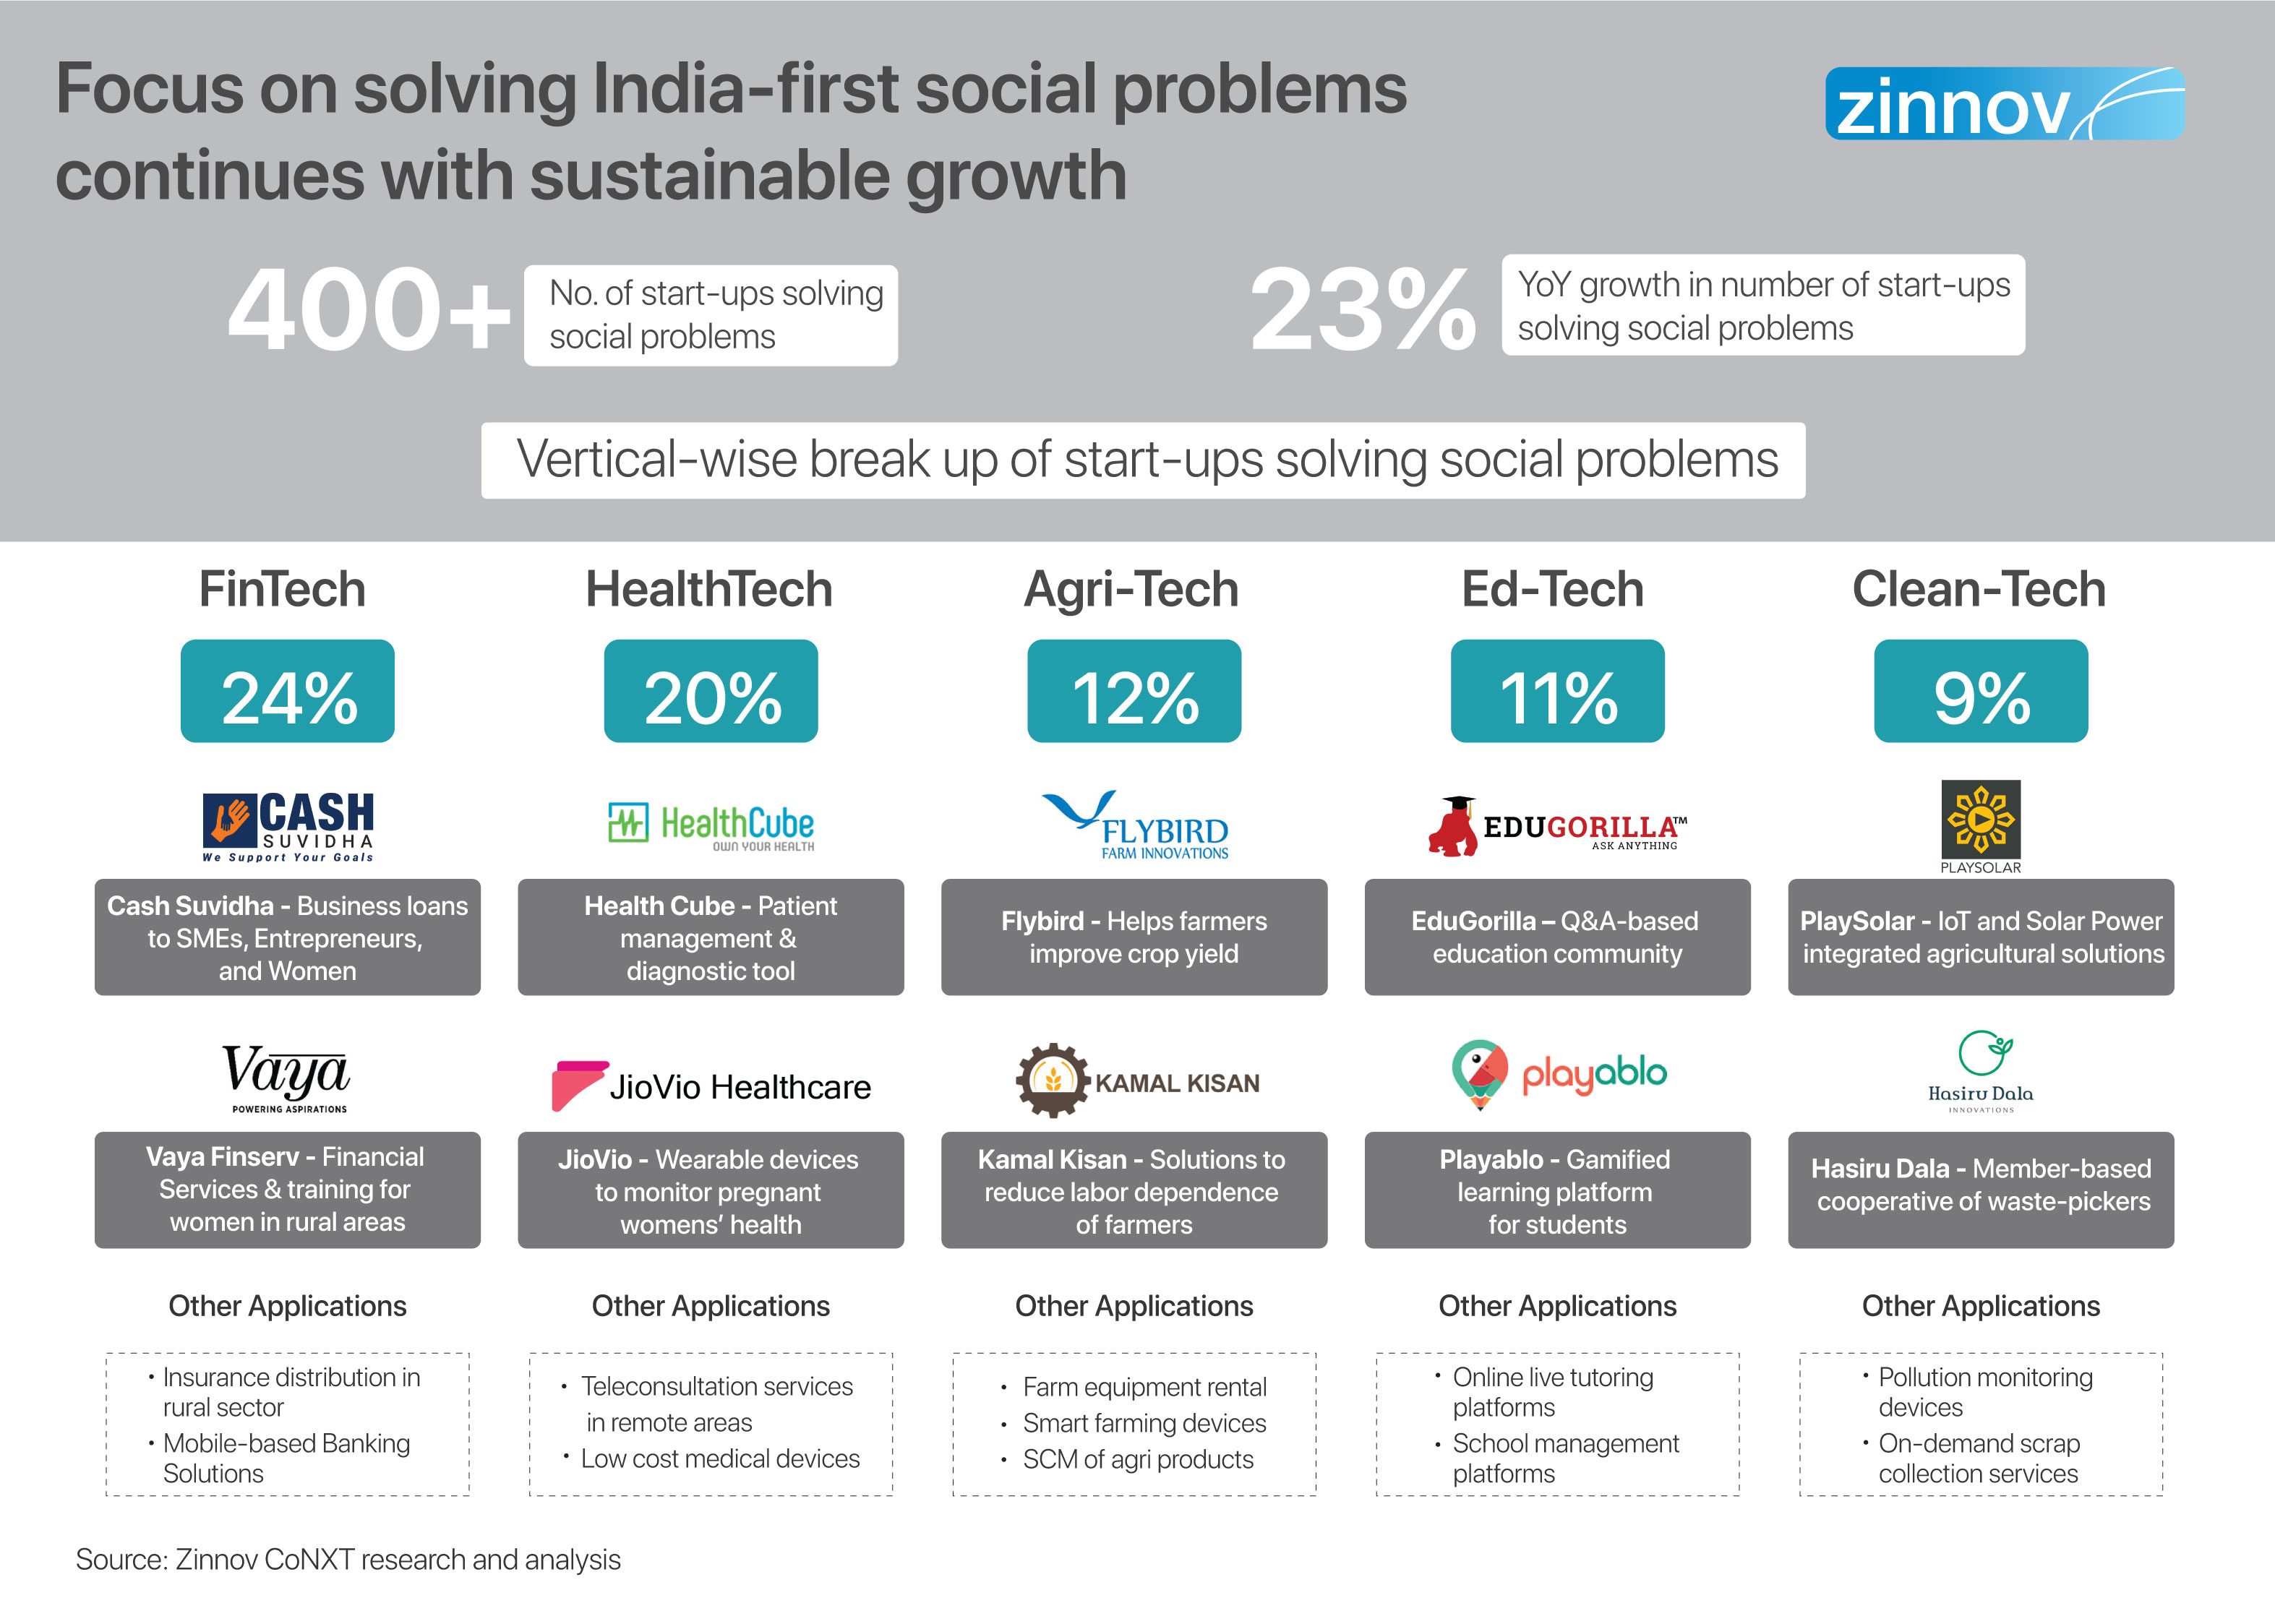 focus on solving India-first social problems